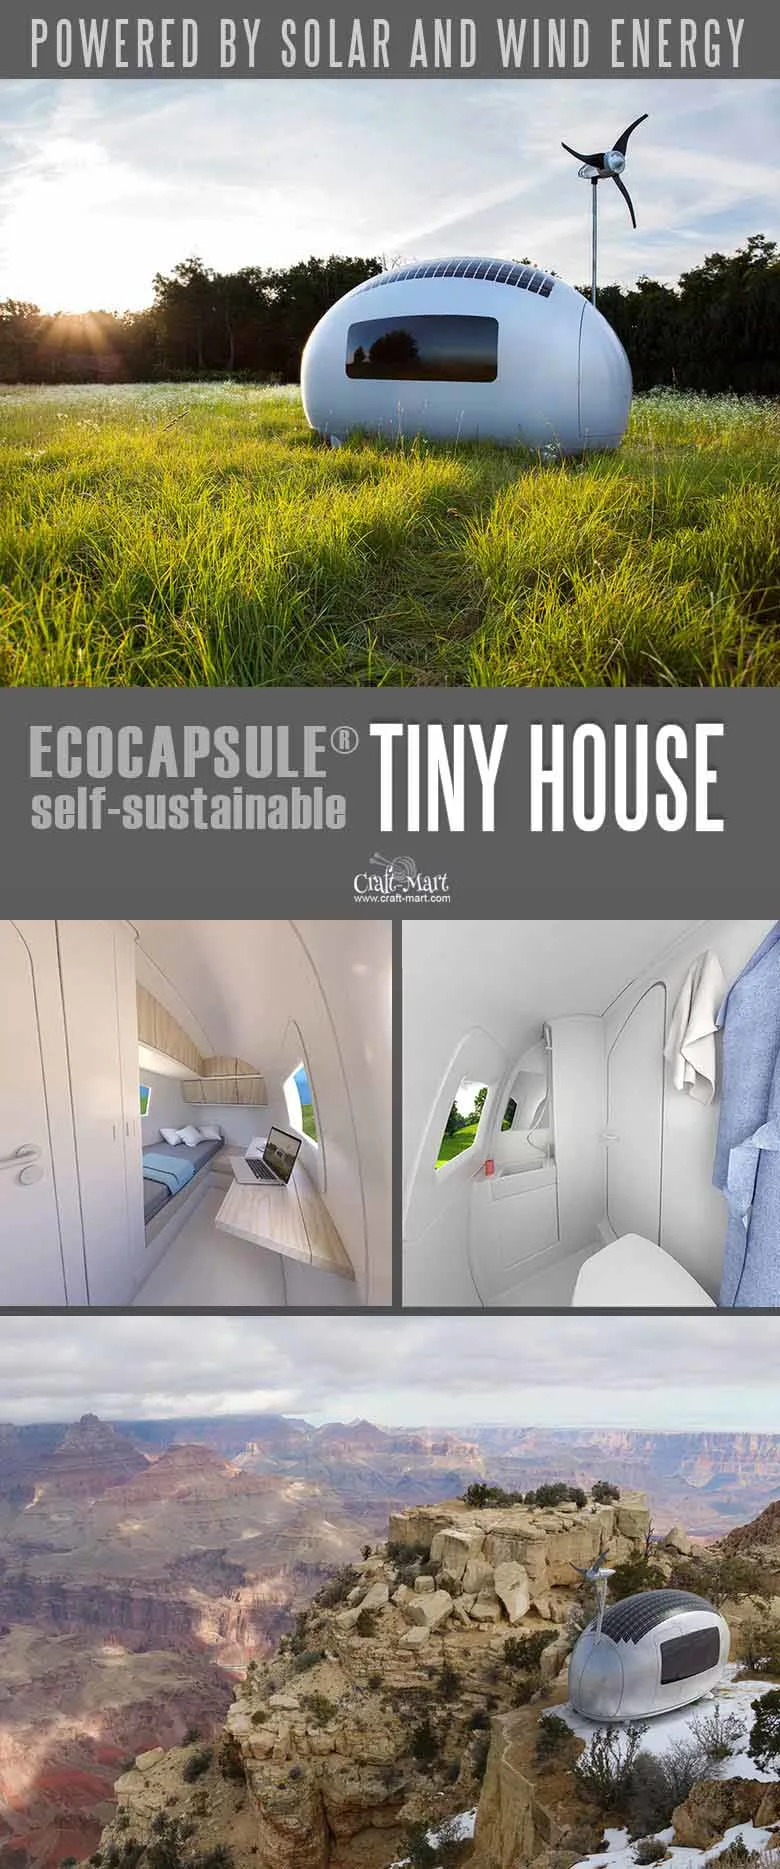 wind and solar powered tiny house - 100% sustainable and doesNOT need any utilities besides internet connection! Keep dreaming about your perfect tiny house or take an action and get one of these little affordable homes! #tinyhouseplans #tinyhome #tinyhouses #realestate #smallhouseplans